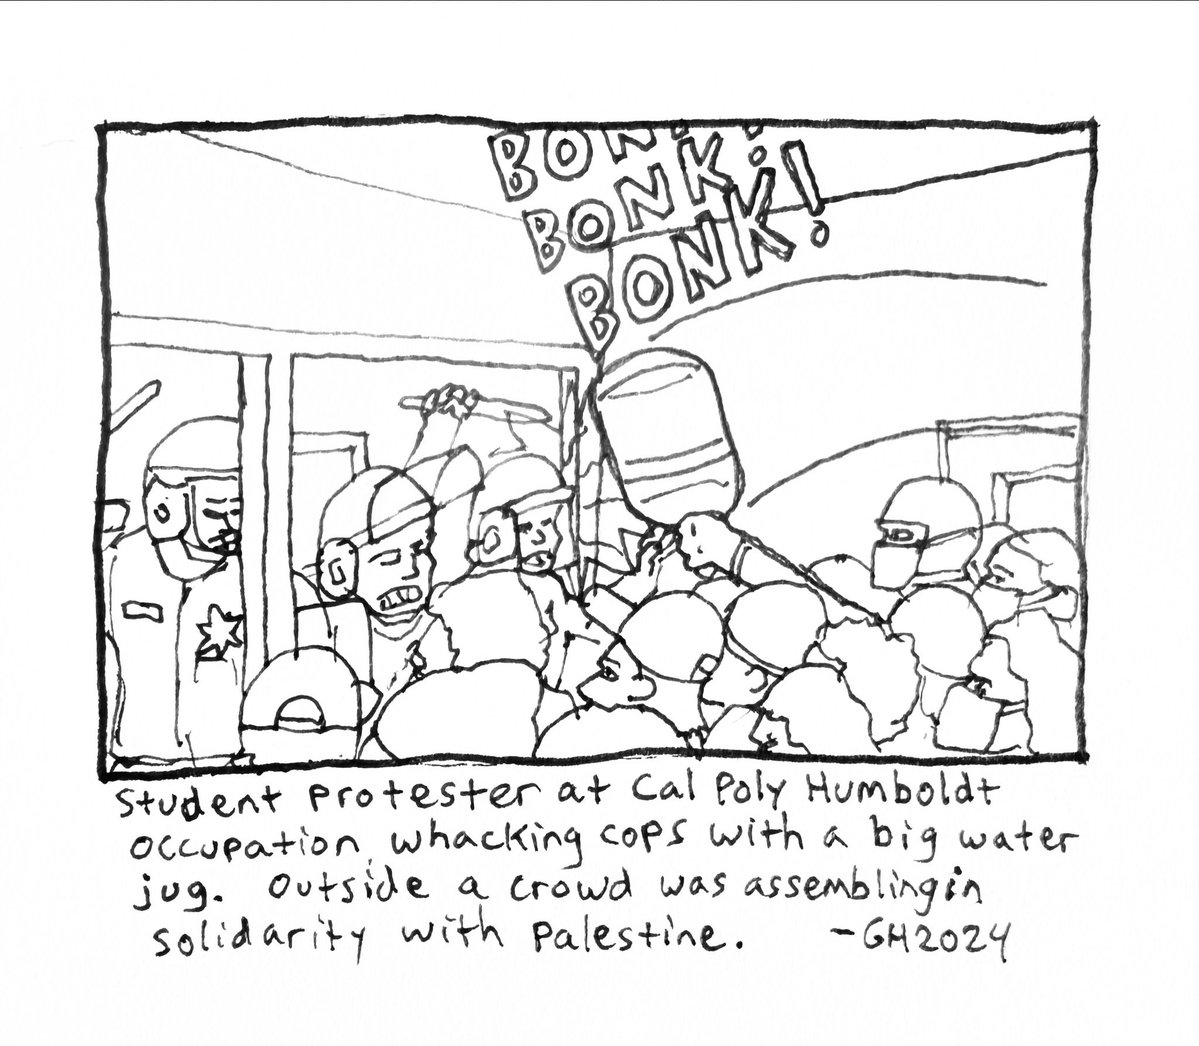 Here is a drawing I did in my sketchbook of students at the Cal Poly Humboldt Gaza solidarity encampment facing the attacking cops, one student was whacking them with a big water jug. Wonderful.